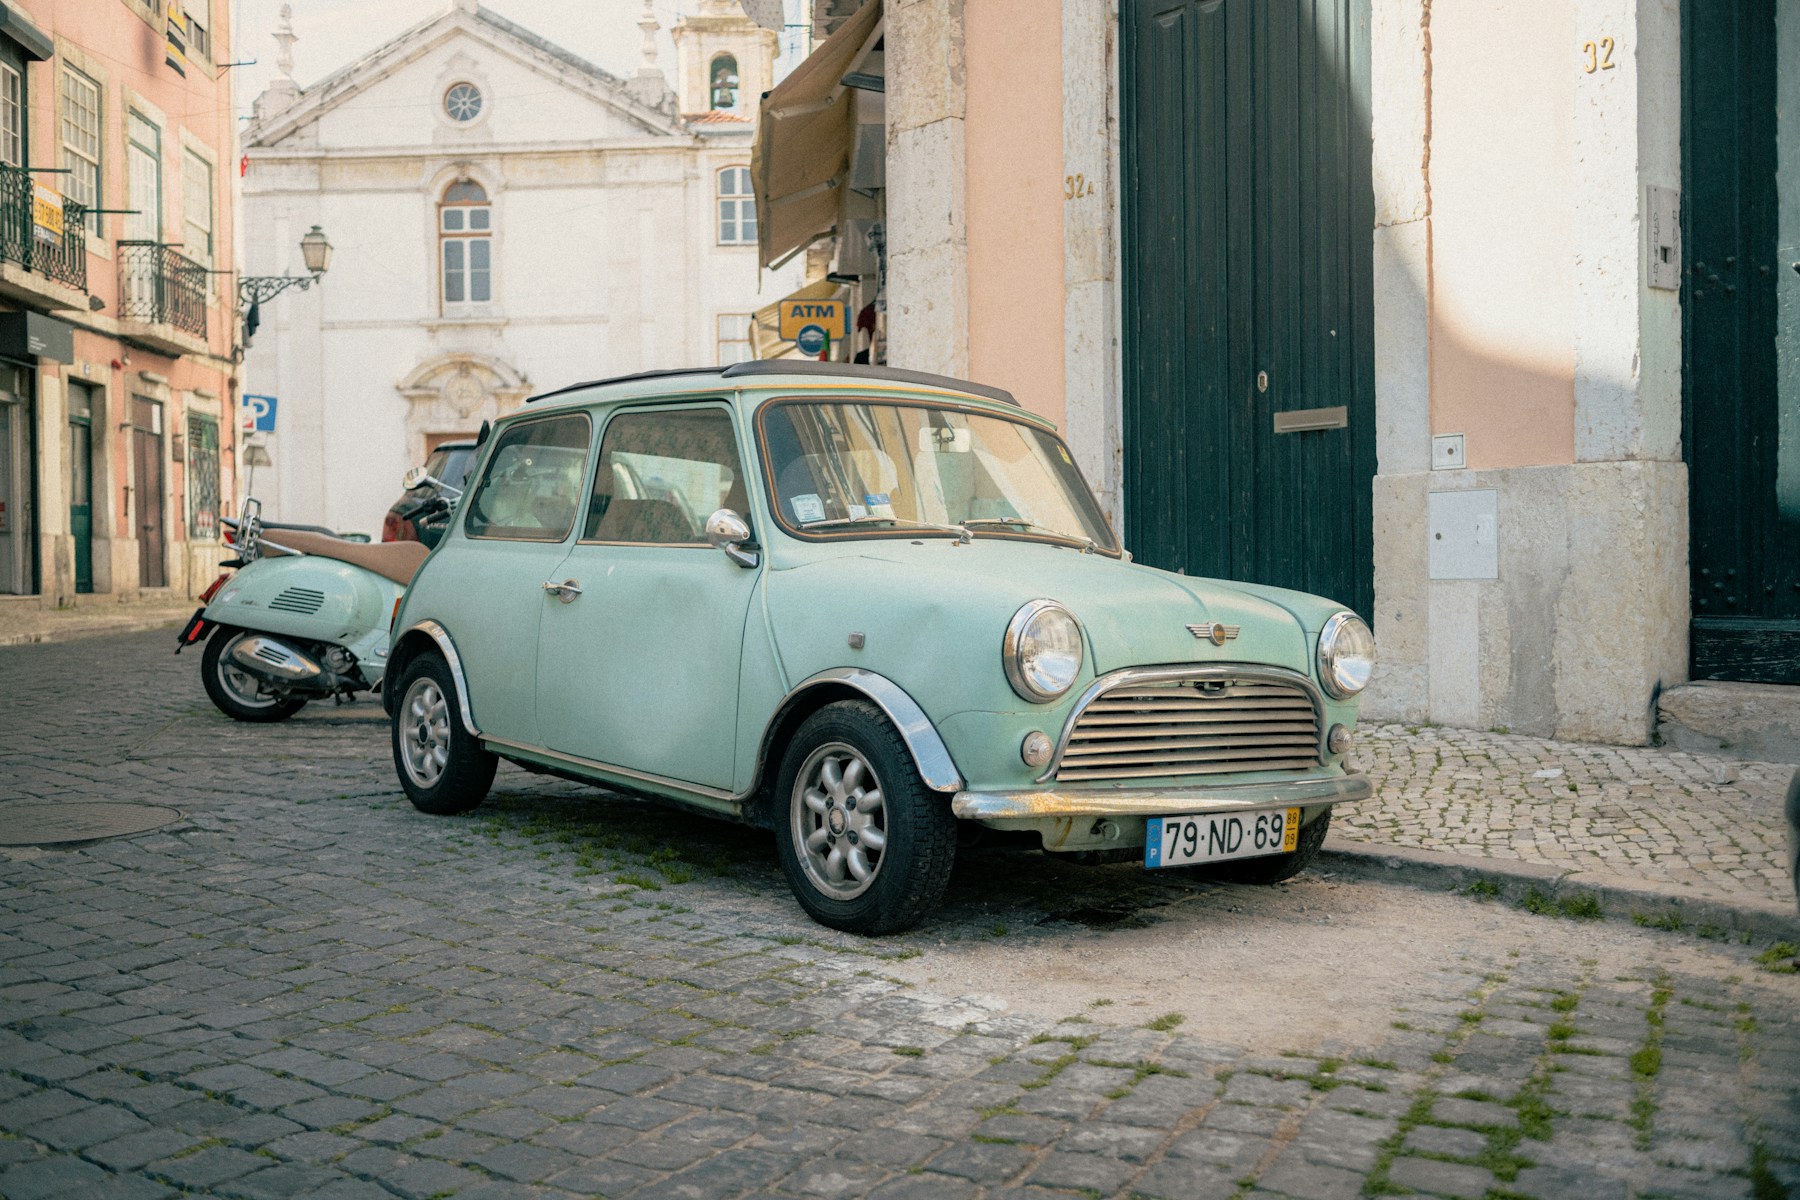 If you’re moving to Portugal and thinking of bringing your car with you, it’s important to understand the road taxes and regulations for imported vehicles. While the cost of living in Portugal may be affordable, car prices in the country can be high compared to other European countries. However, importing a car to Portugal requires […]